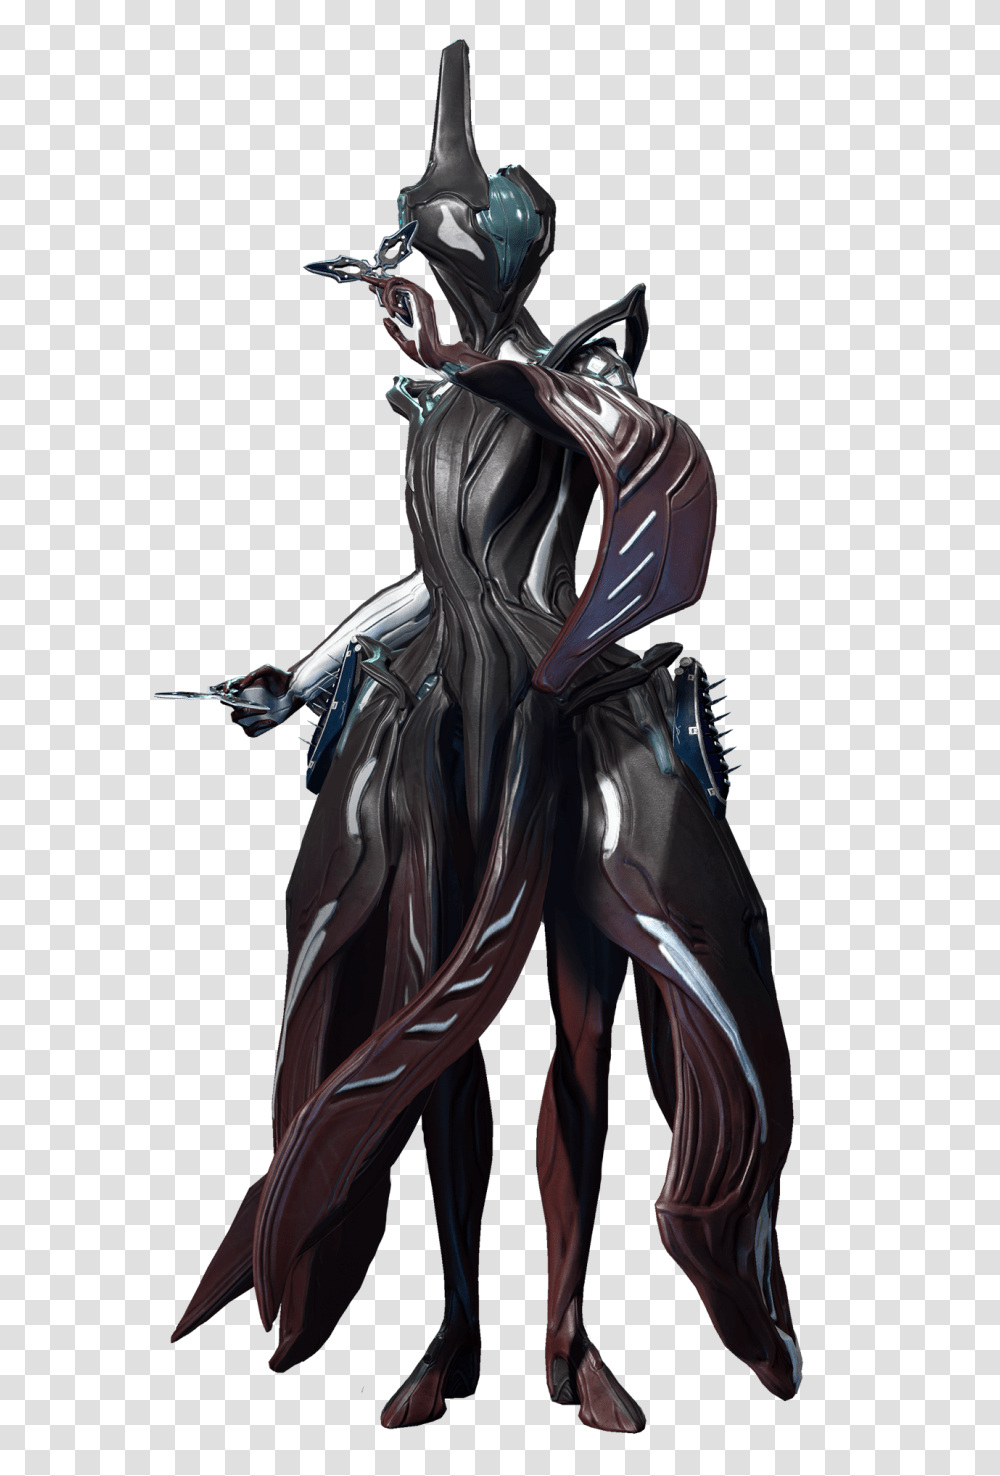 Equinox Night Is The Form Of Darkness And Tranquility, Batman, Figurine, Costume, Sculpture Transparent Png